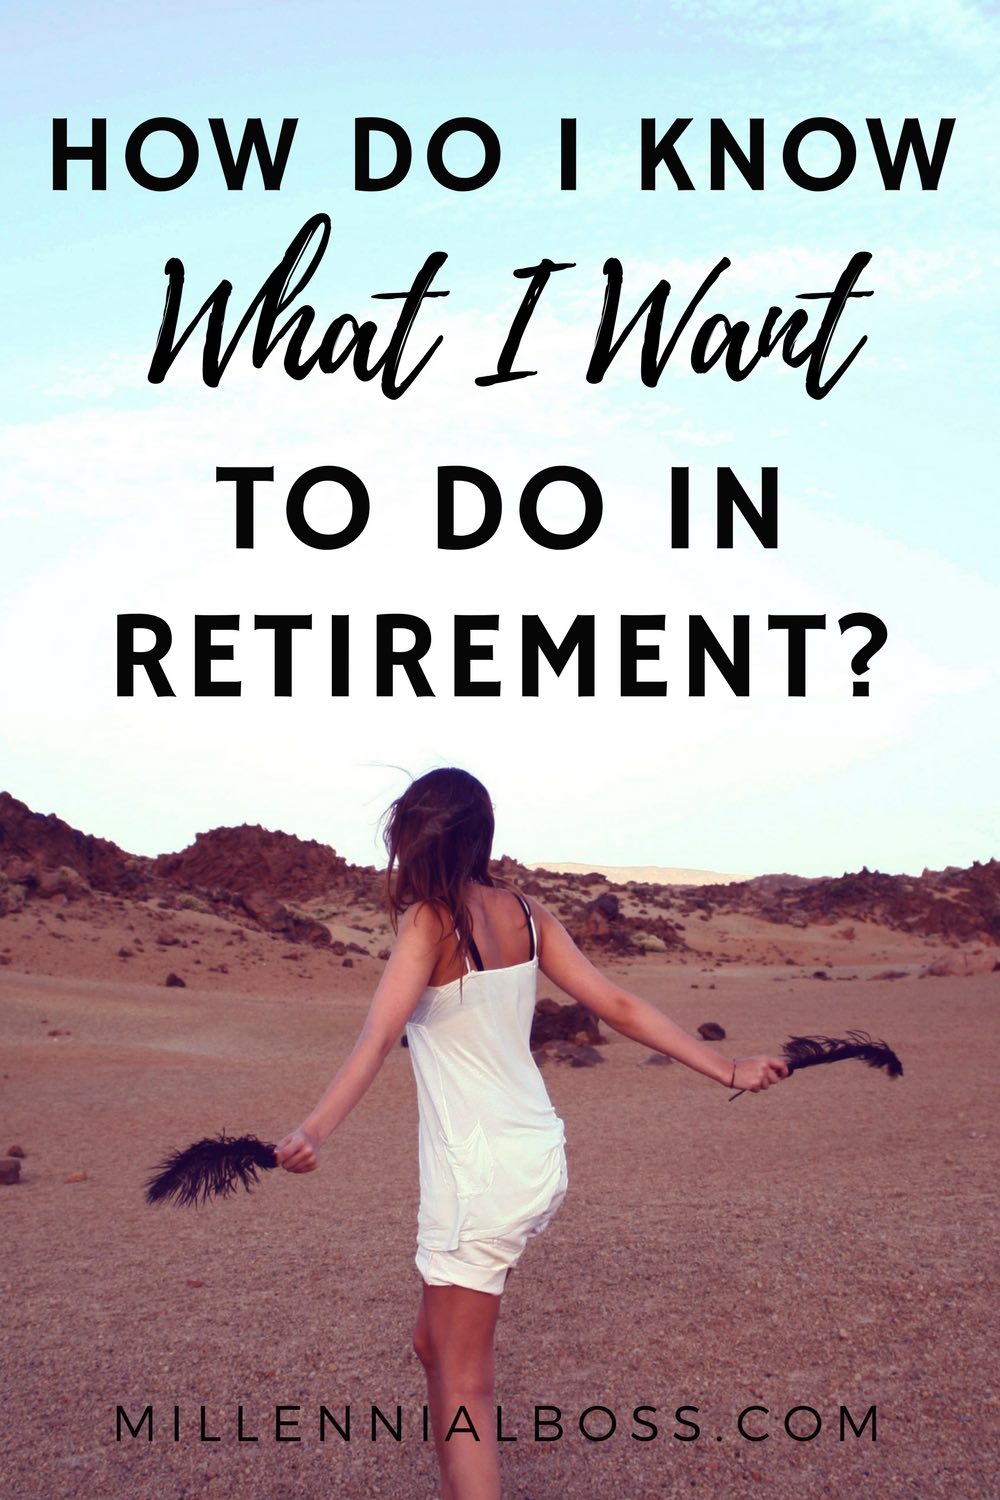 Early Retirement Police beware - I have no idea what I want to do in Early Retirement and FIRE. Financial independence is the goal but not the destination.